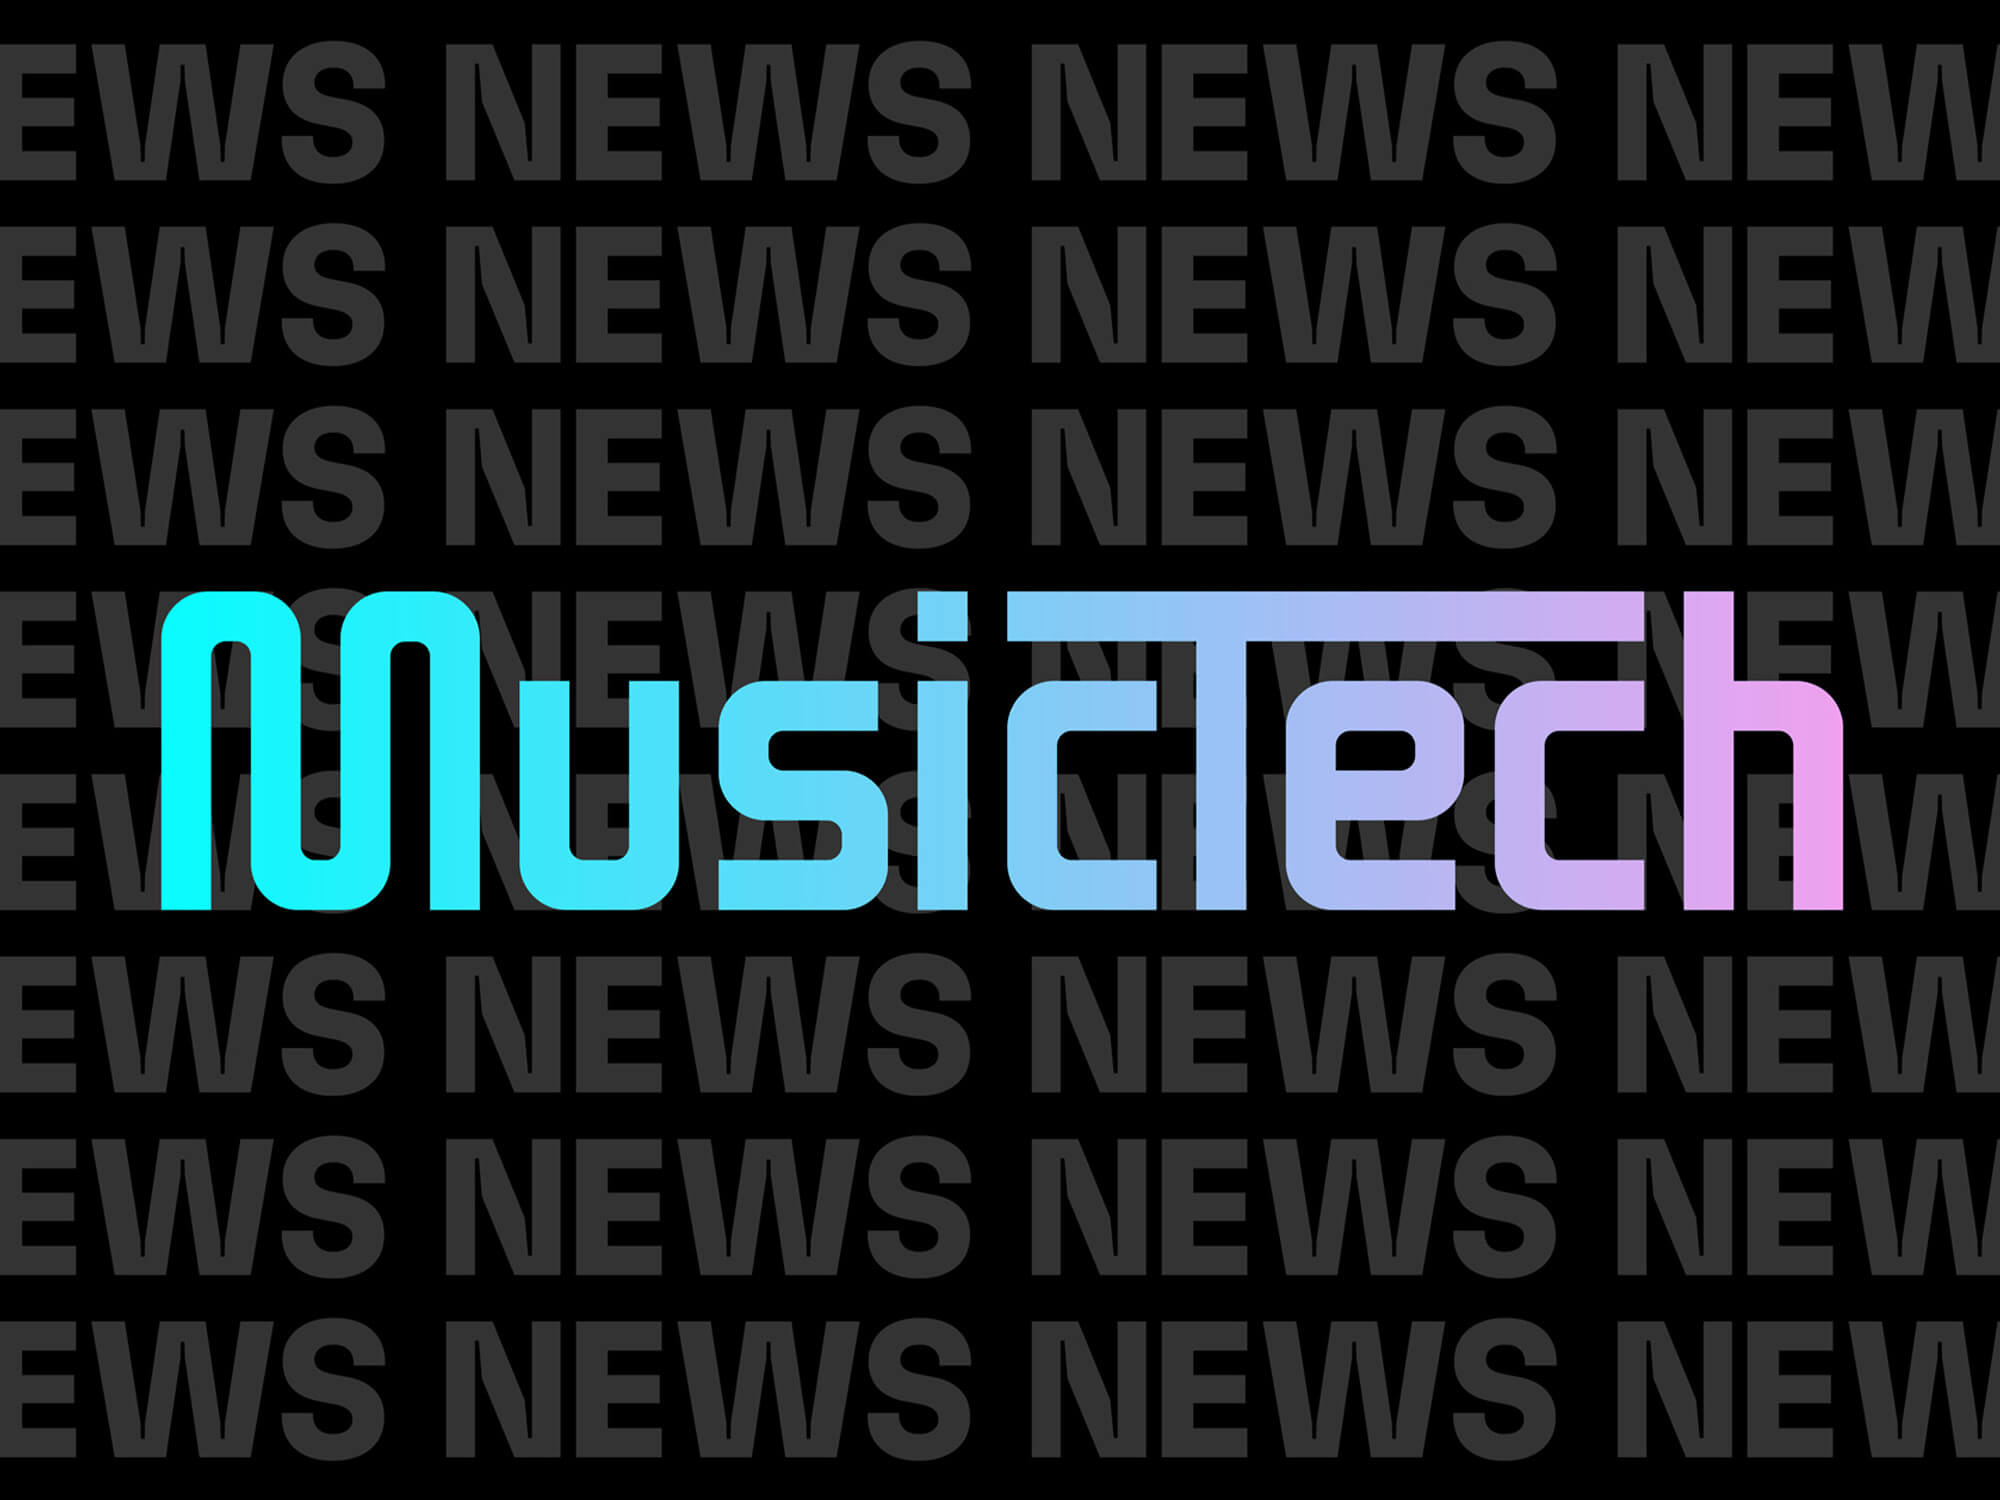 The MusicTech logo with the word "news" repeated in the background